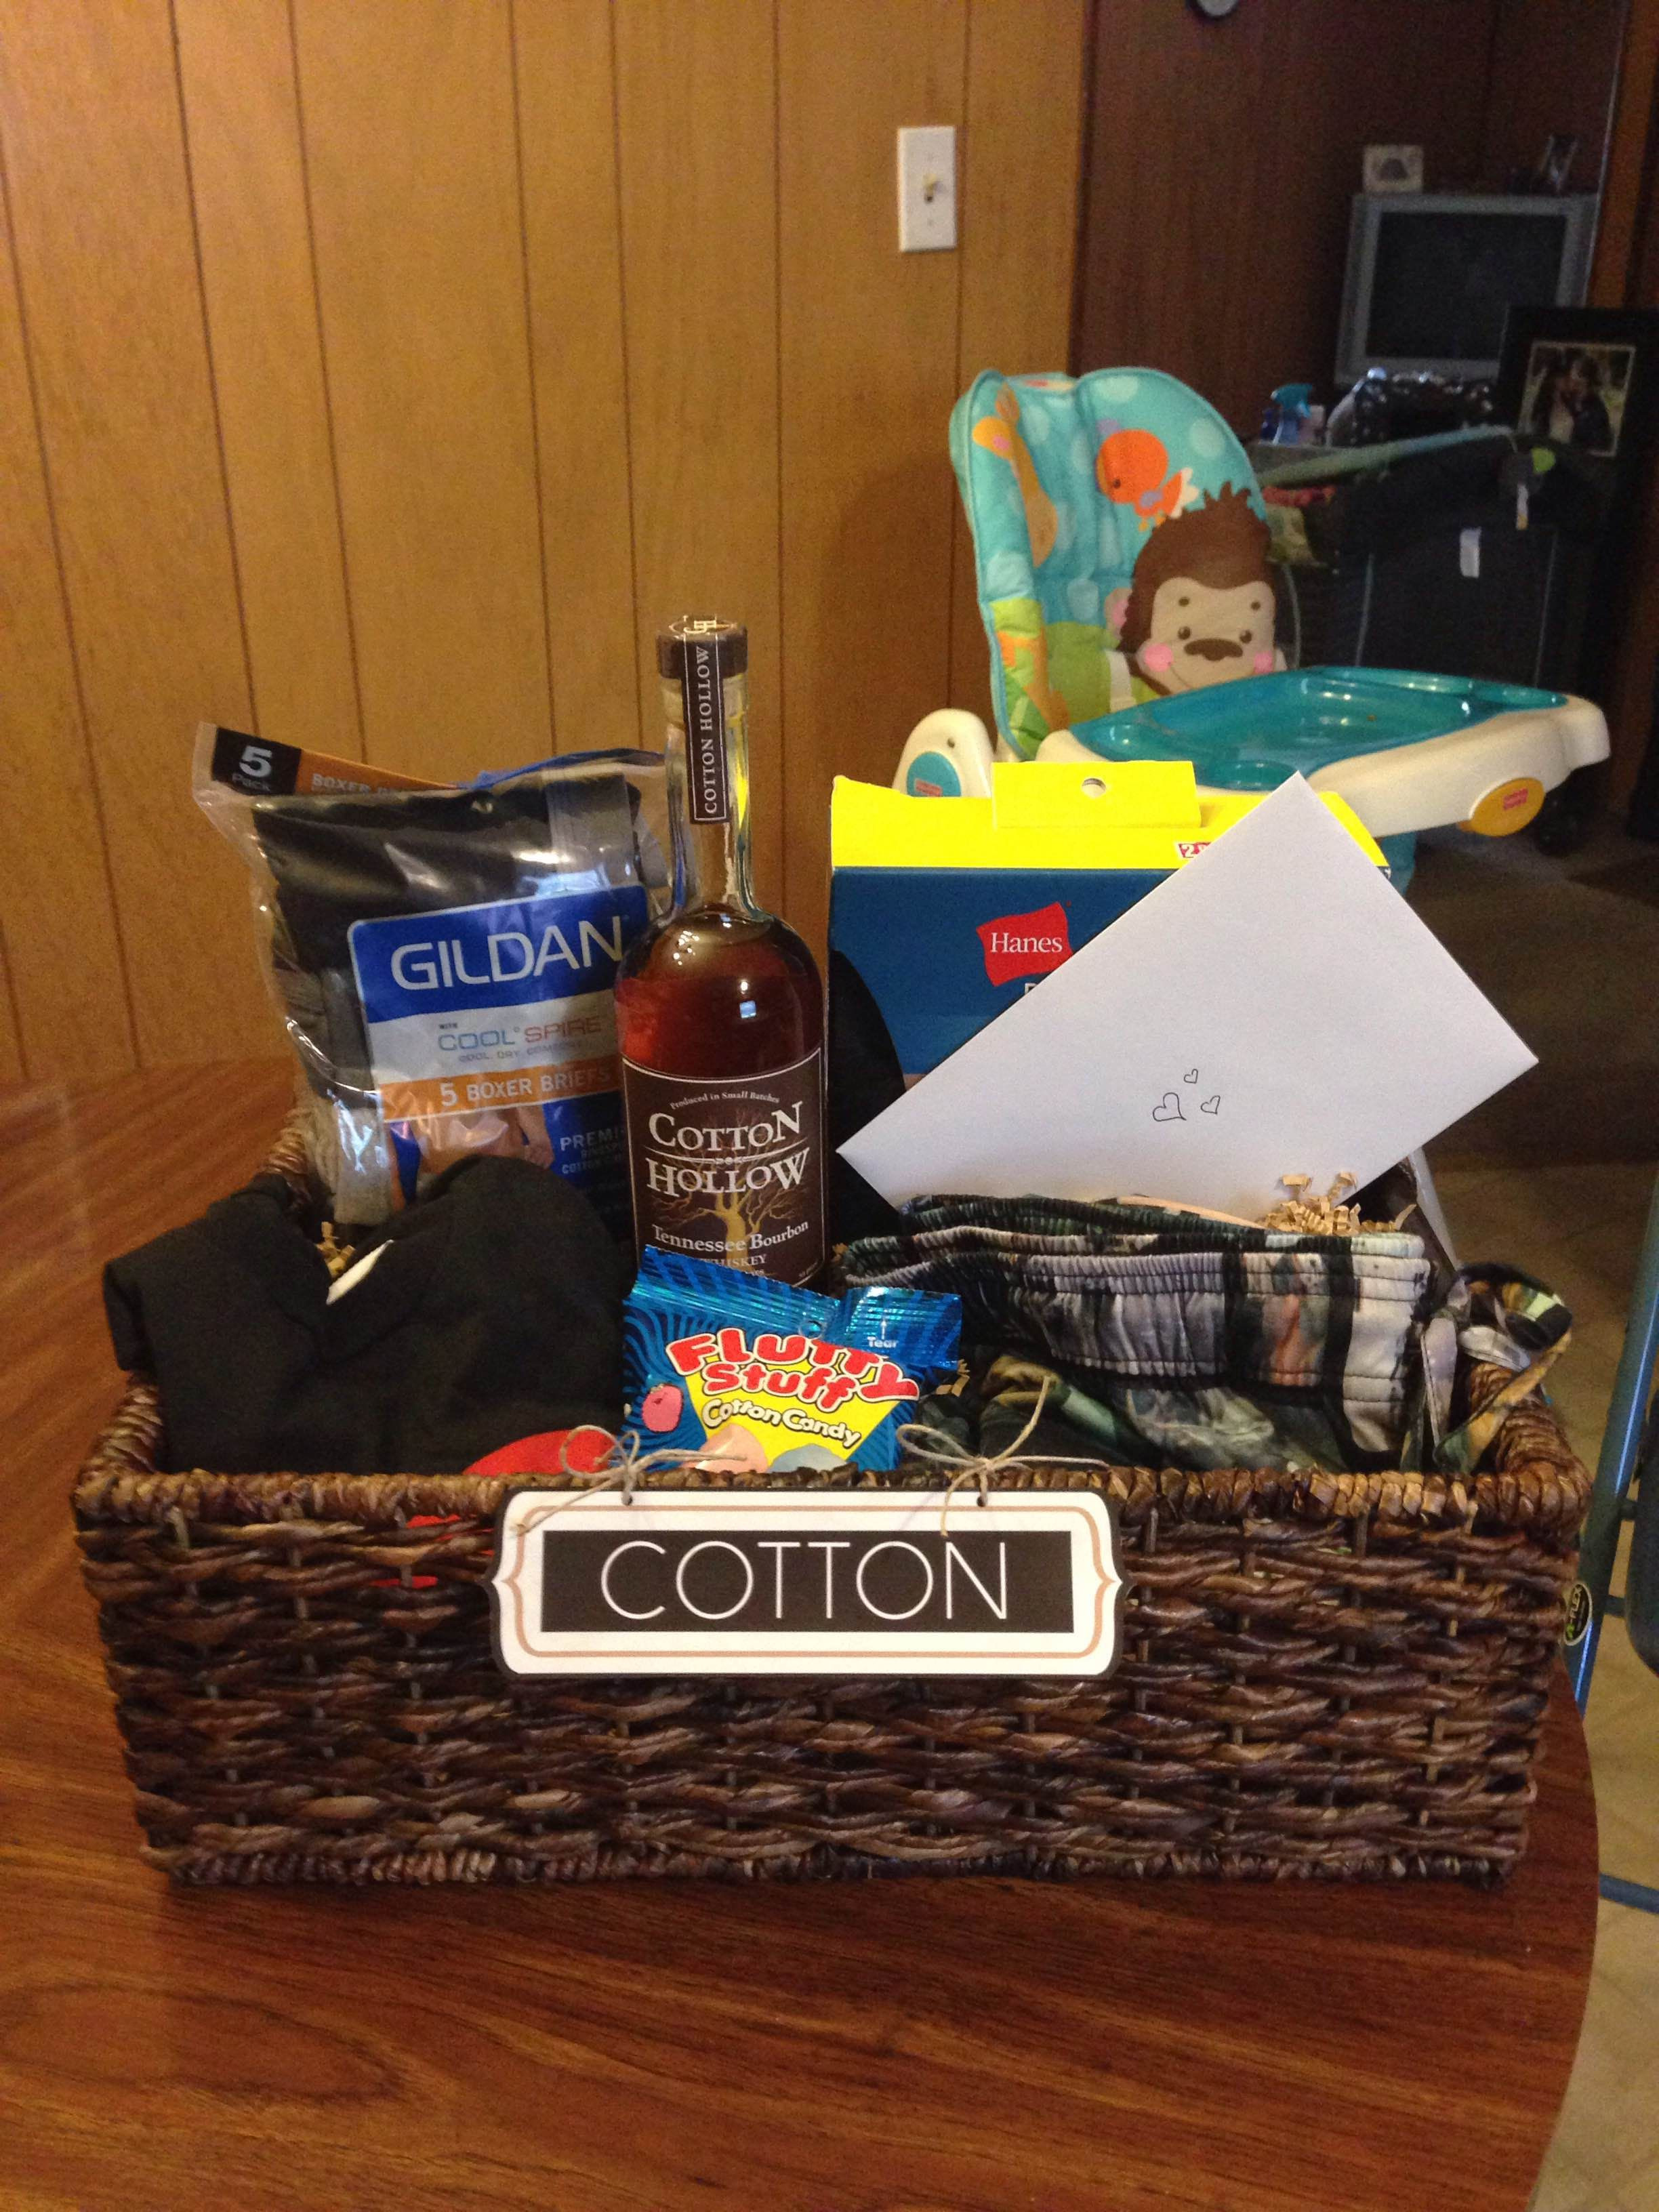 Anniversary Gift Basket Ideas
 "Cotton" t basket I put to her for my husband for our